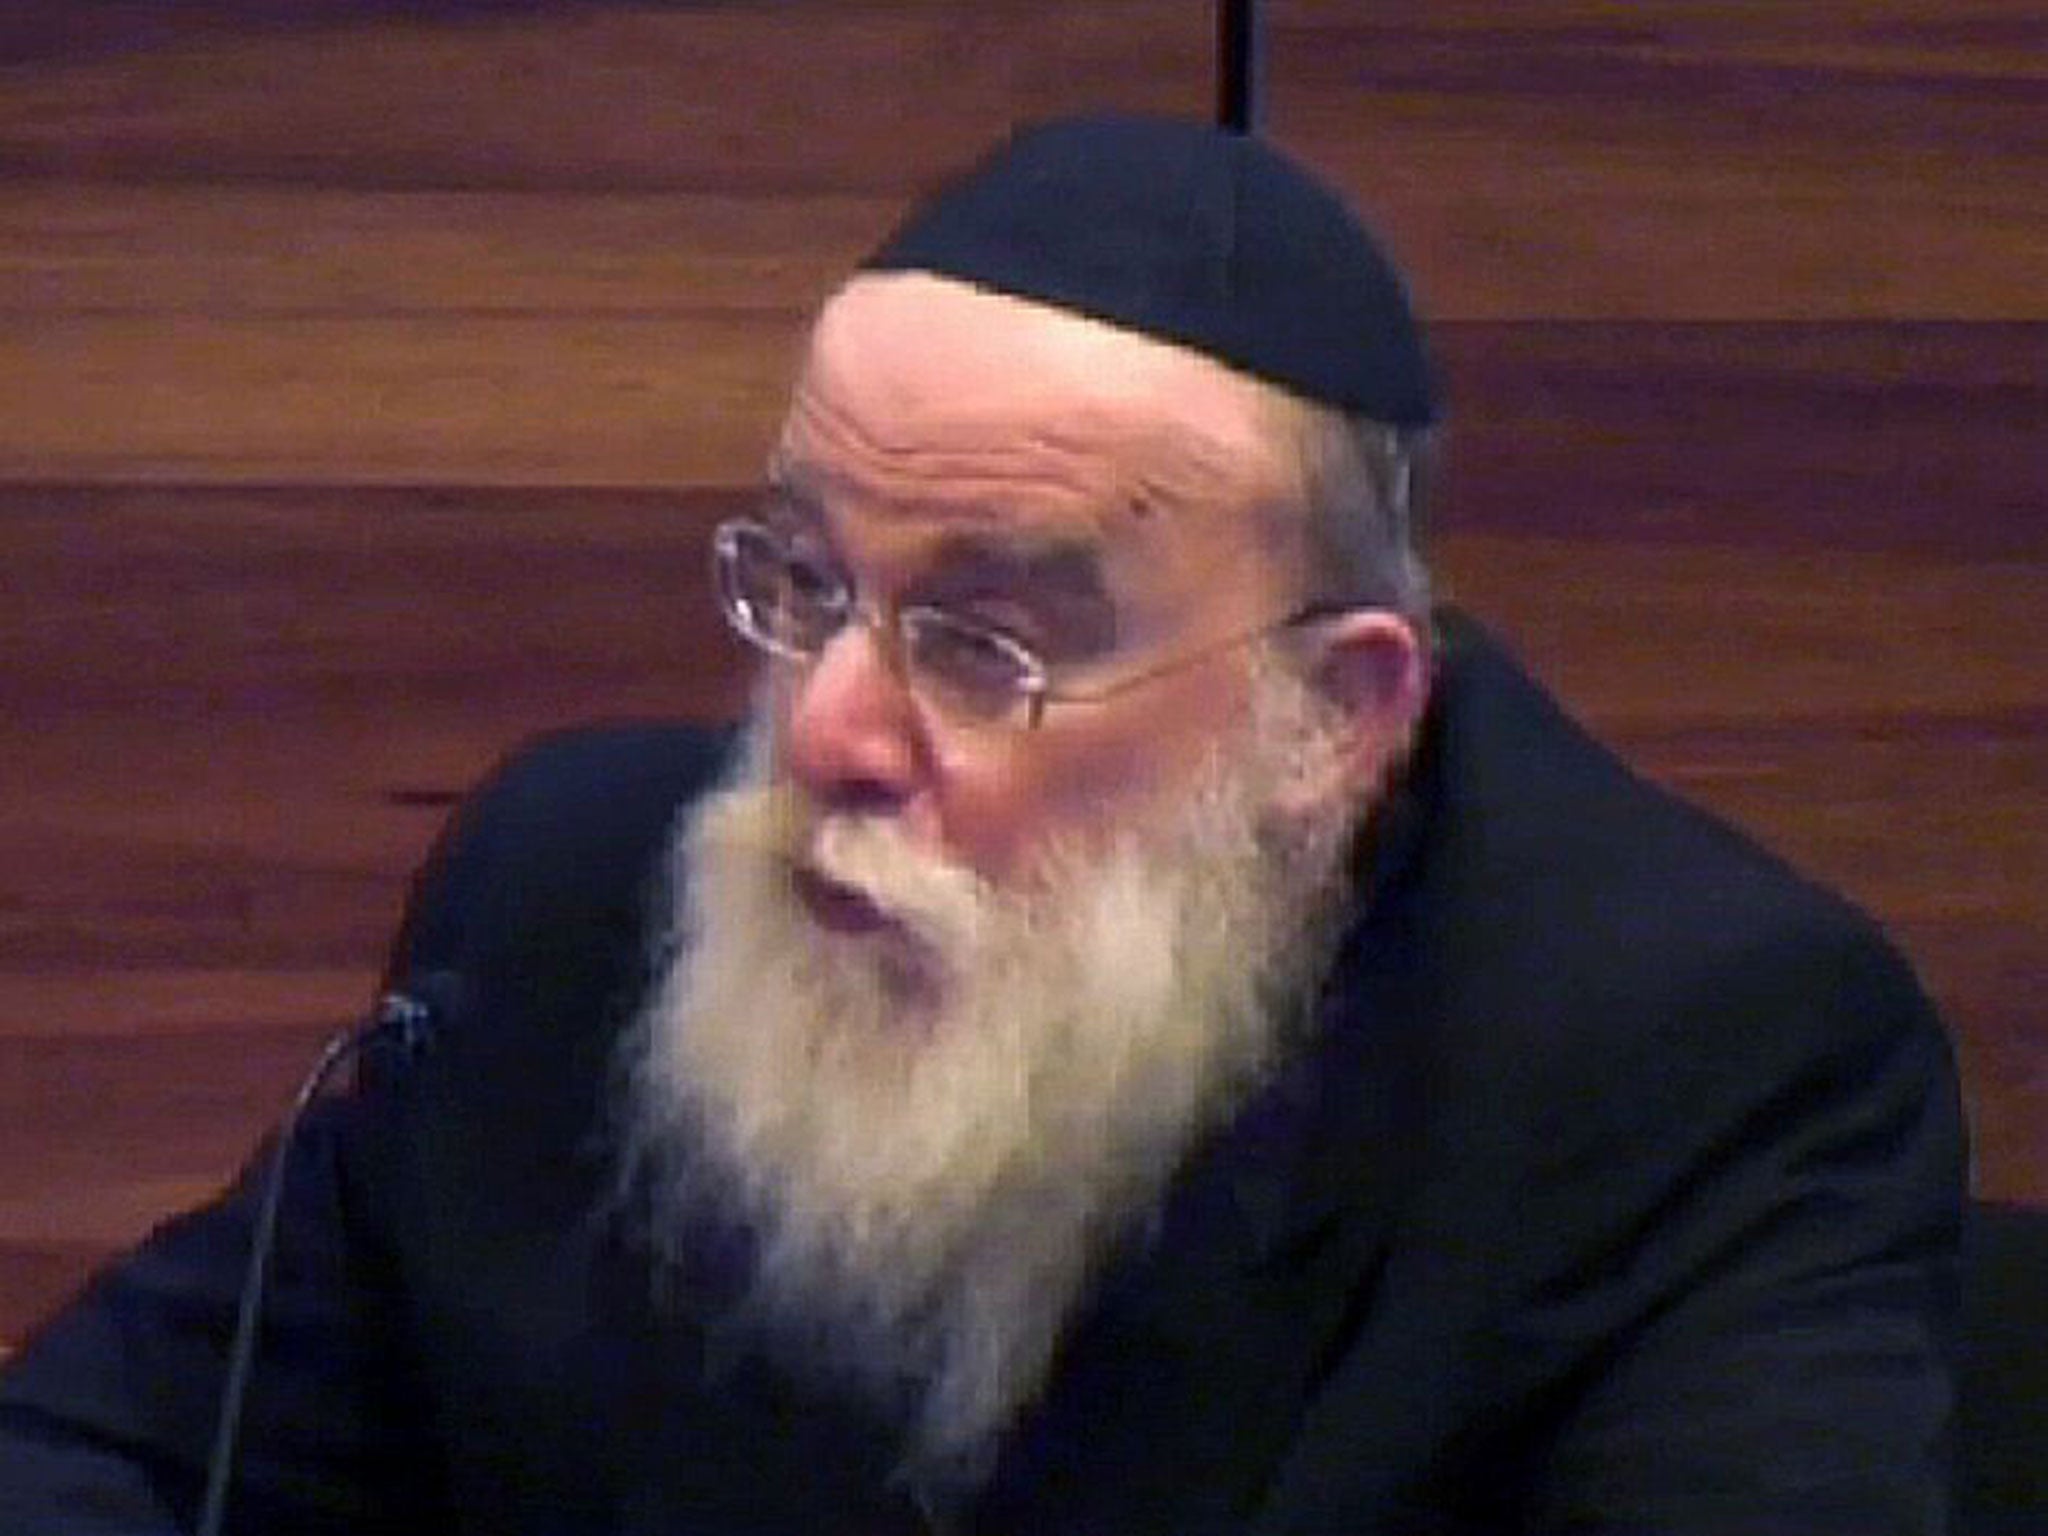 Rabbi Zvi Telsner appearing at the Royal Commission into Institutional Responses to Child Abuse